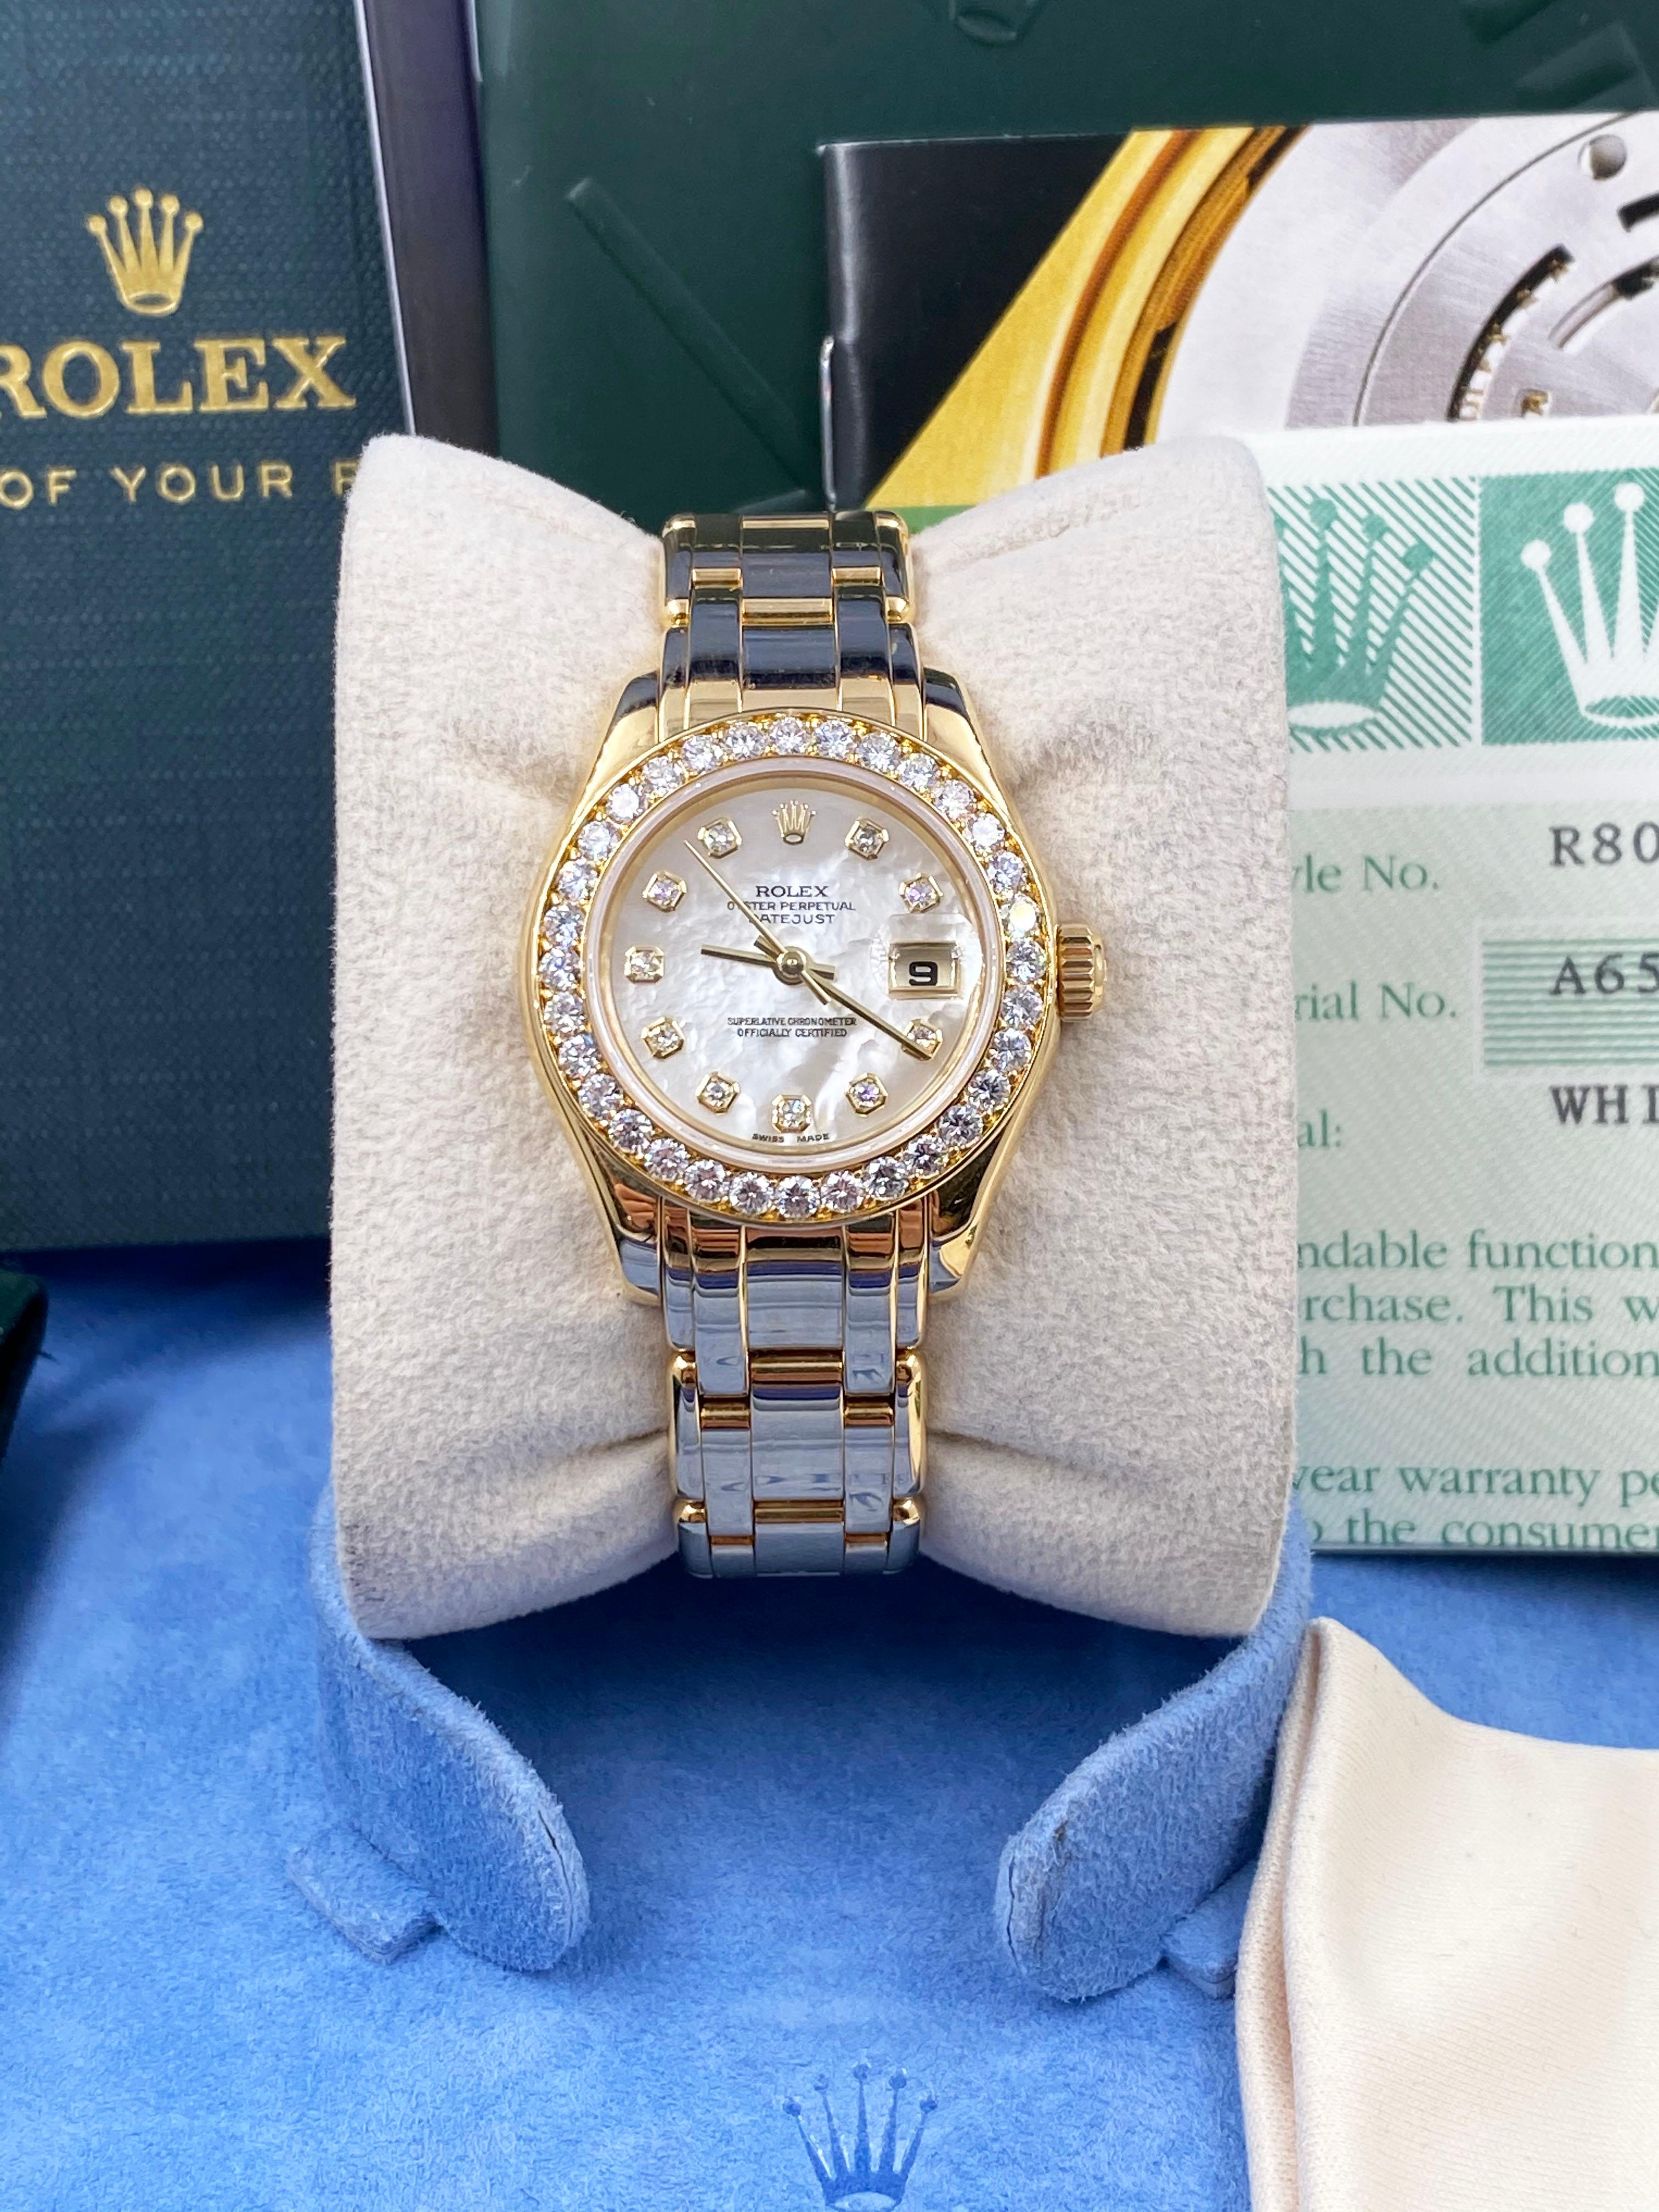 Style Number: 80298
 
Serial: A657***

Year: 2000
 
Model: Pearlmaster
 
Case Material: 18K Yellow Gold
 
Band: 18K Yellow Gold
 
Bezel: Original Factory Diamond Bezel
 
Dial: Original Factory Mother of Pearl Diamond Dial 
 
Face: Sapphire Crystal 
